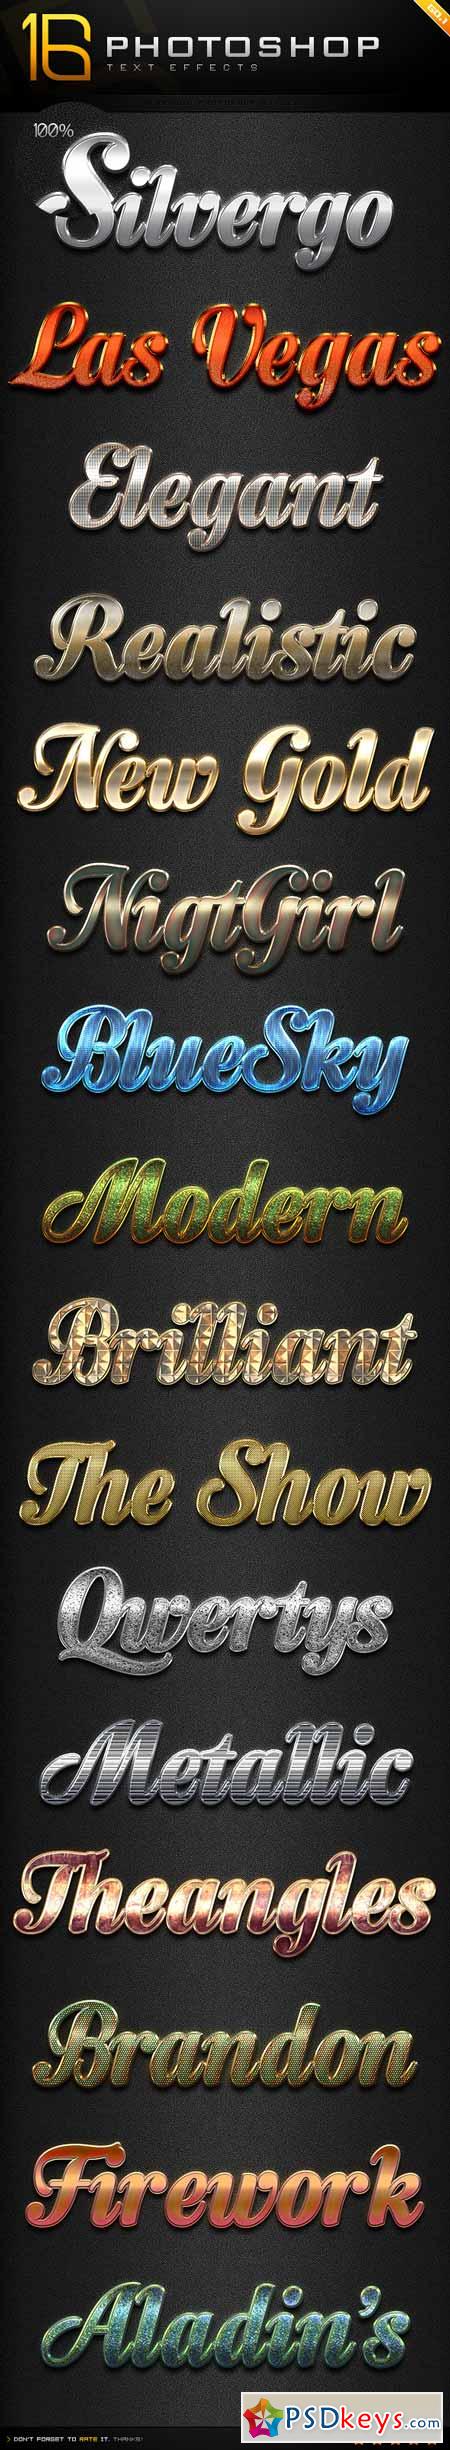 photoshop styles for text